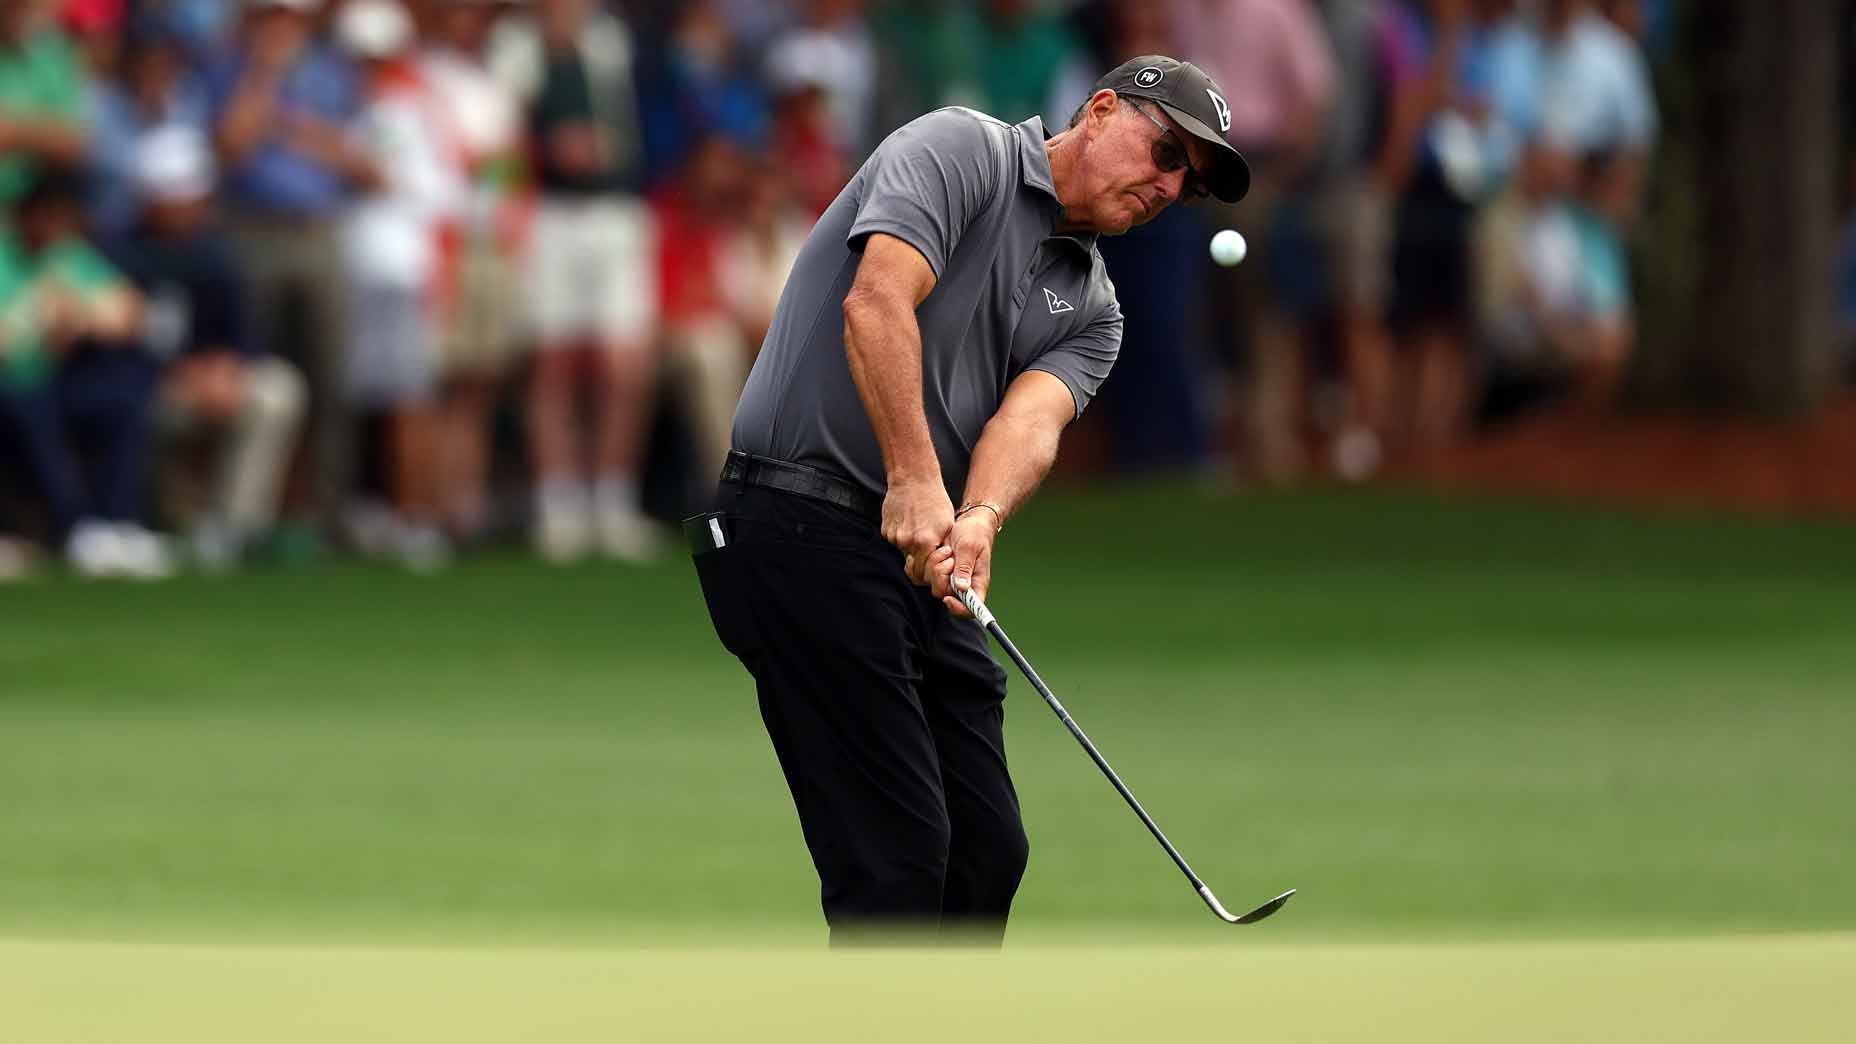 phil mickelson hits a chip shot next to a green